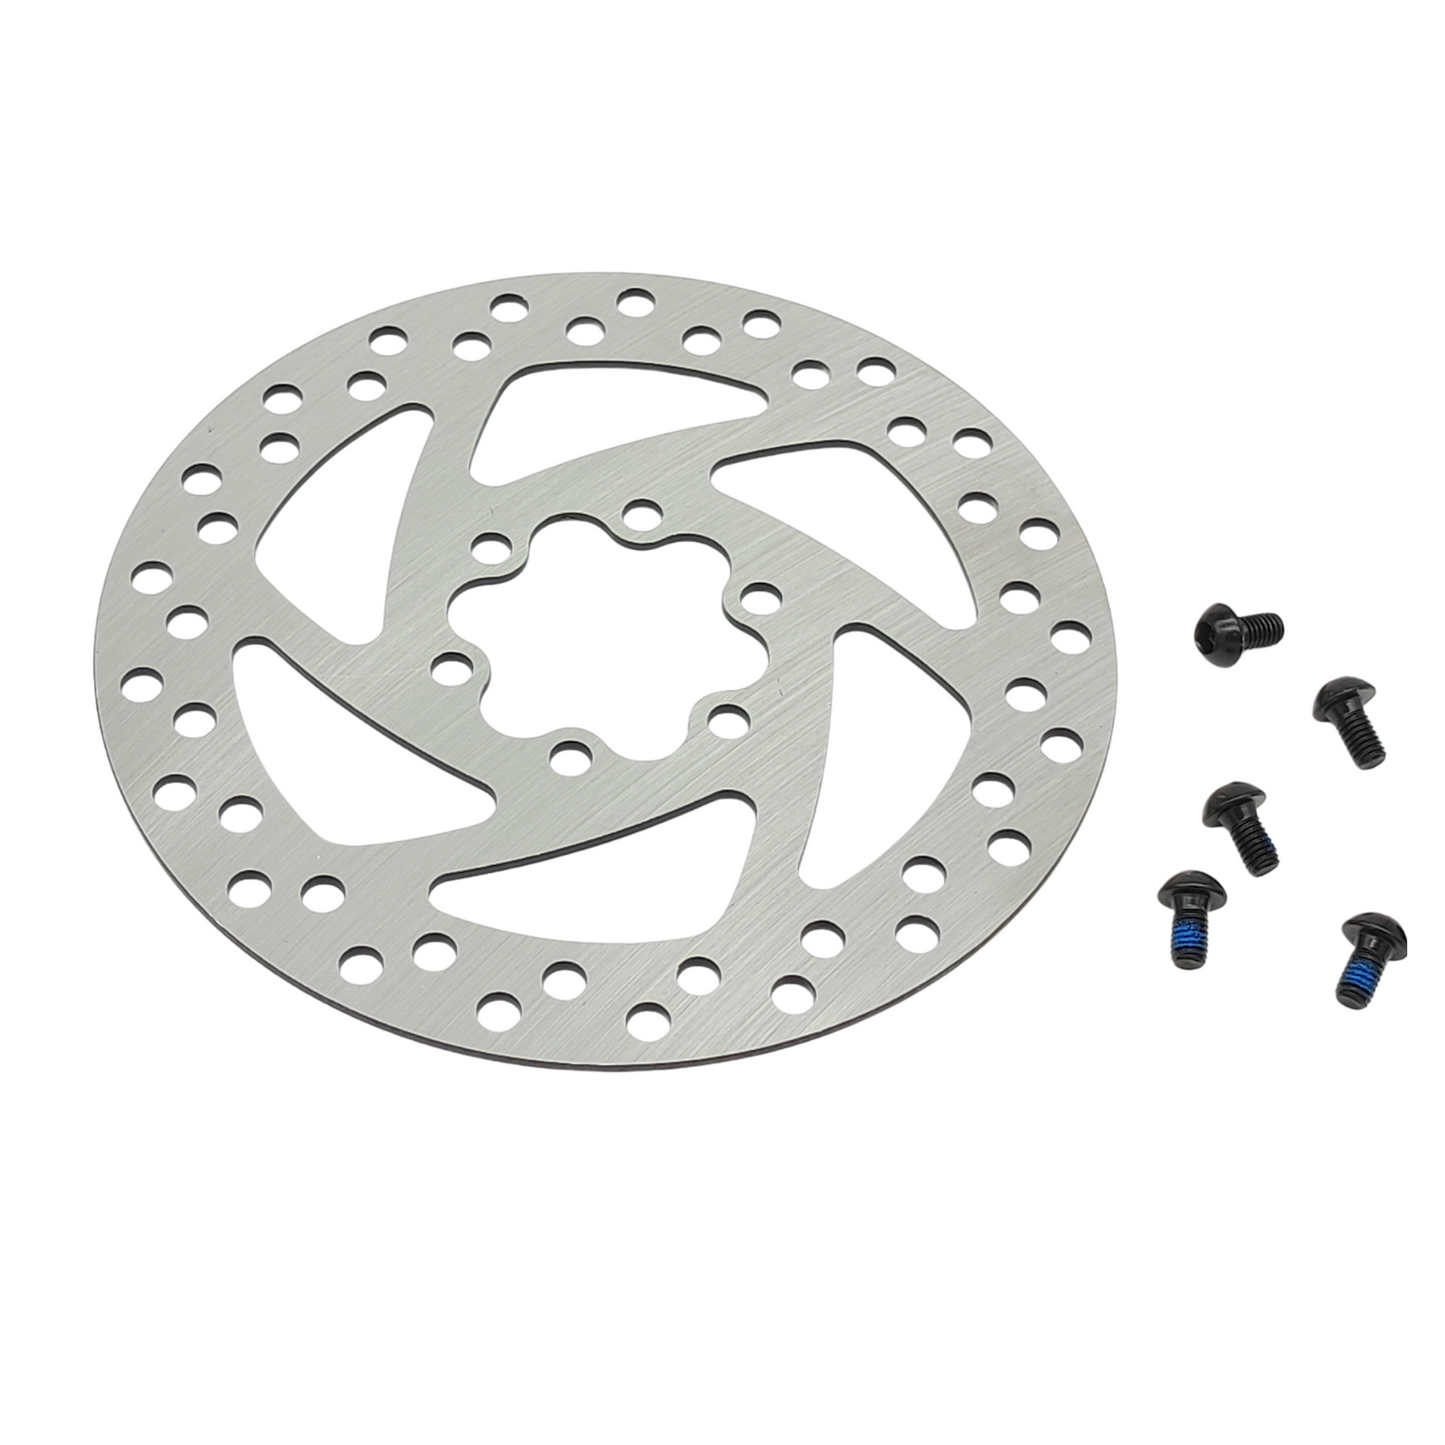 Ninebot F20 F25 F30 F40 brake disc 140mm round 6 hole with screws aftermarket